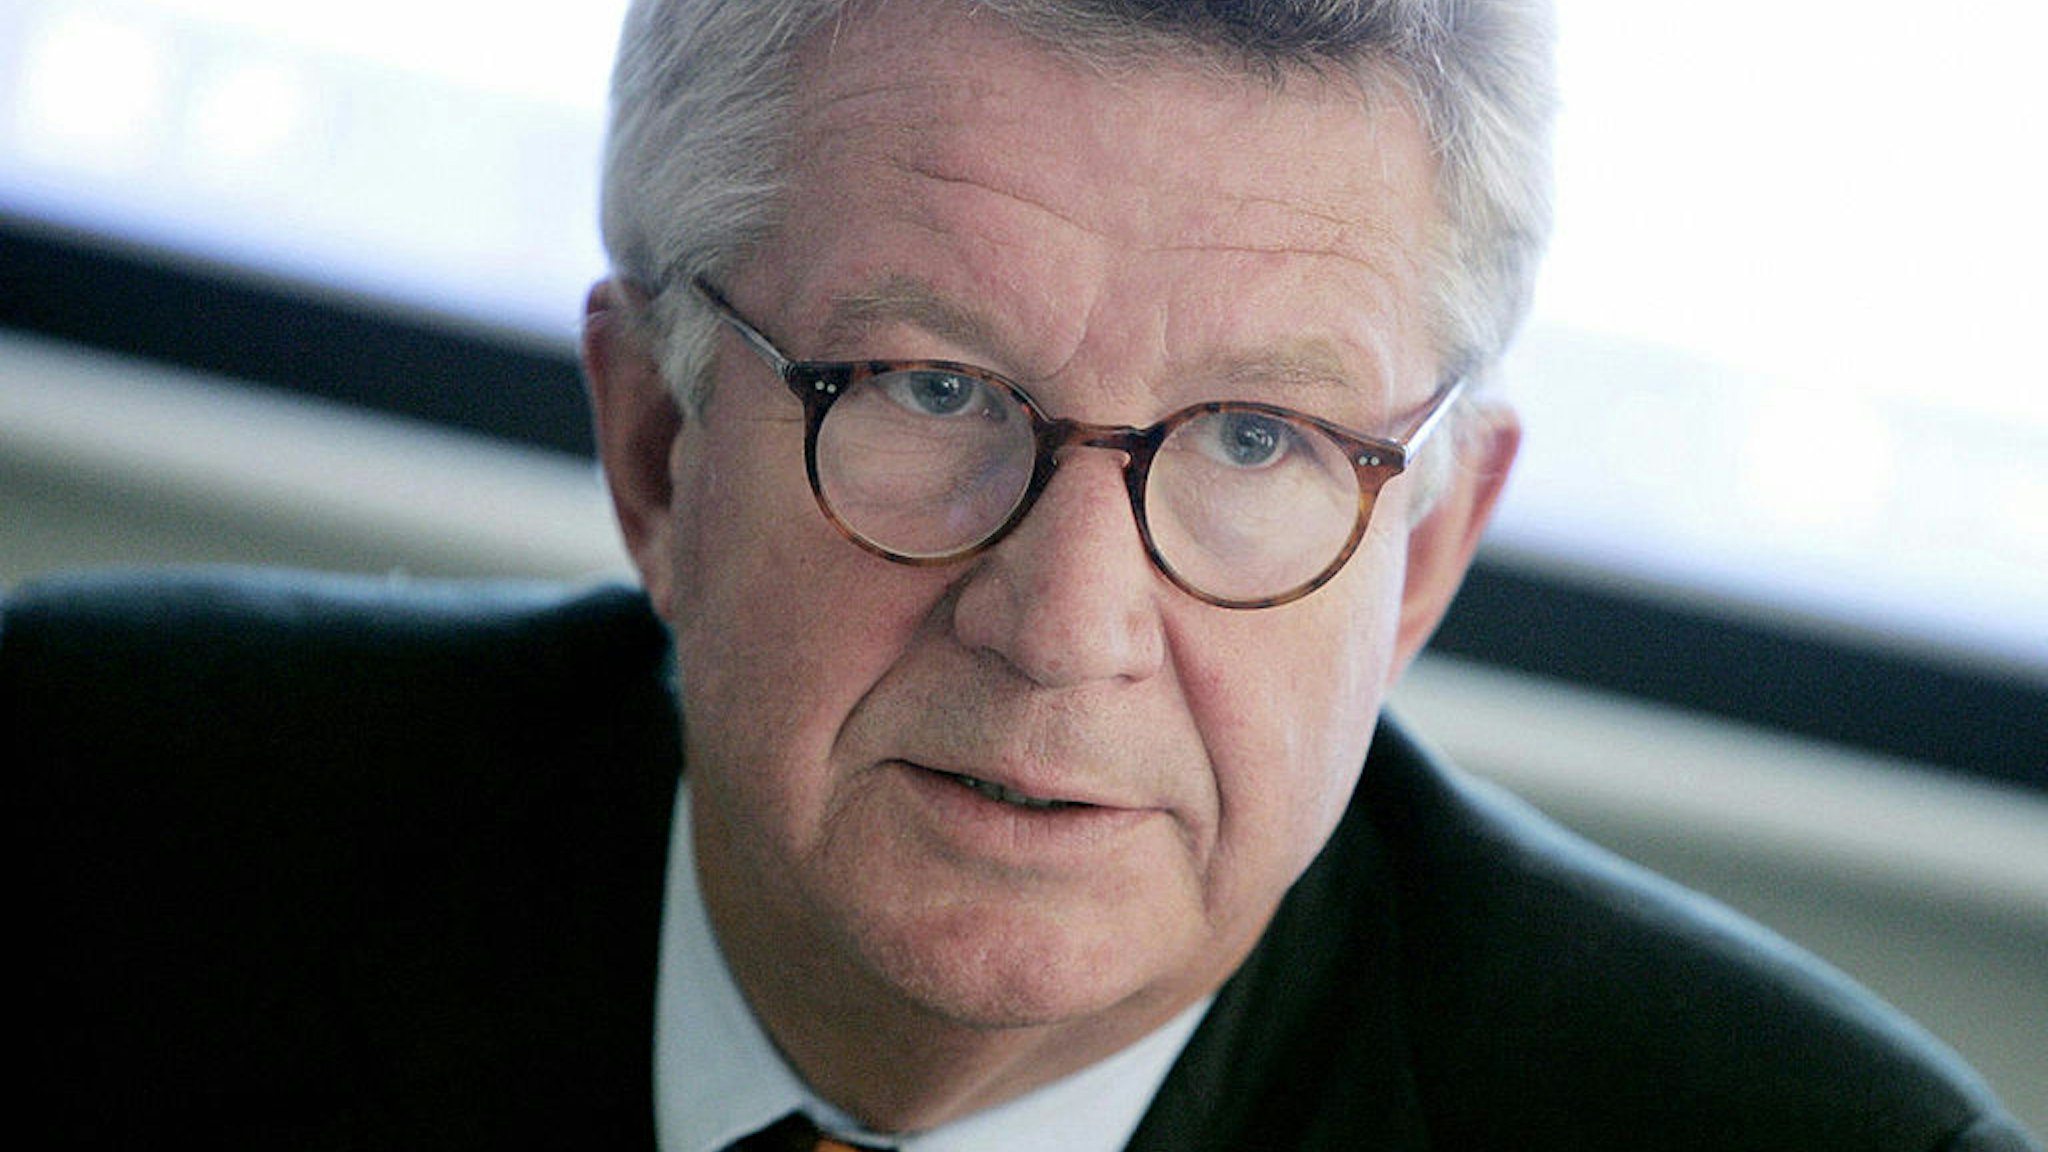 Picture released 18 November 2007 shows Professor Johan Giesecke, Chief Scientist at the European Centre for Disease Prevention and Control (ECDC) answering questions during a press conference in Stockholm.